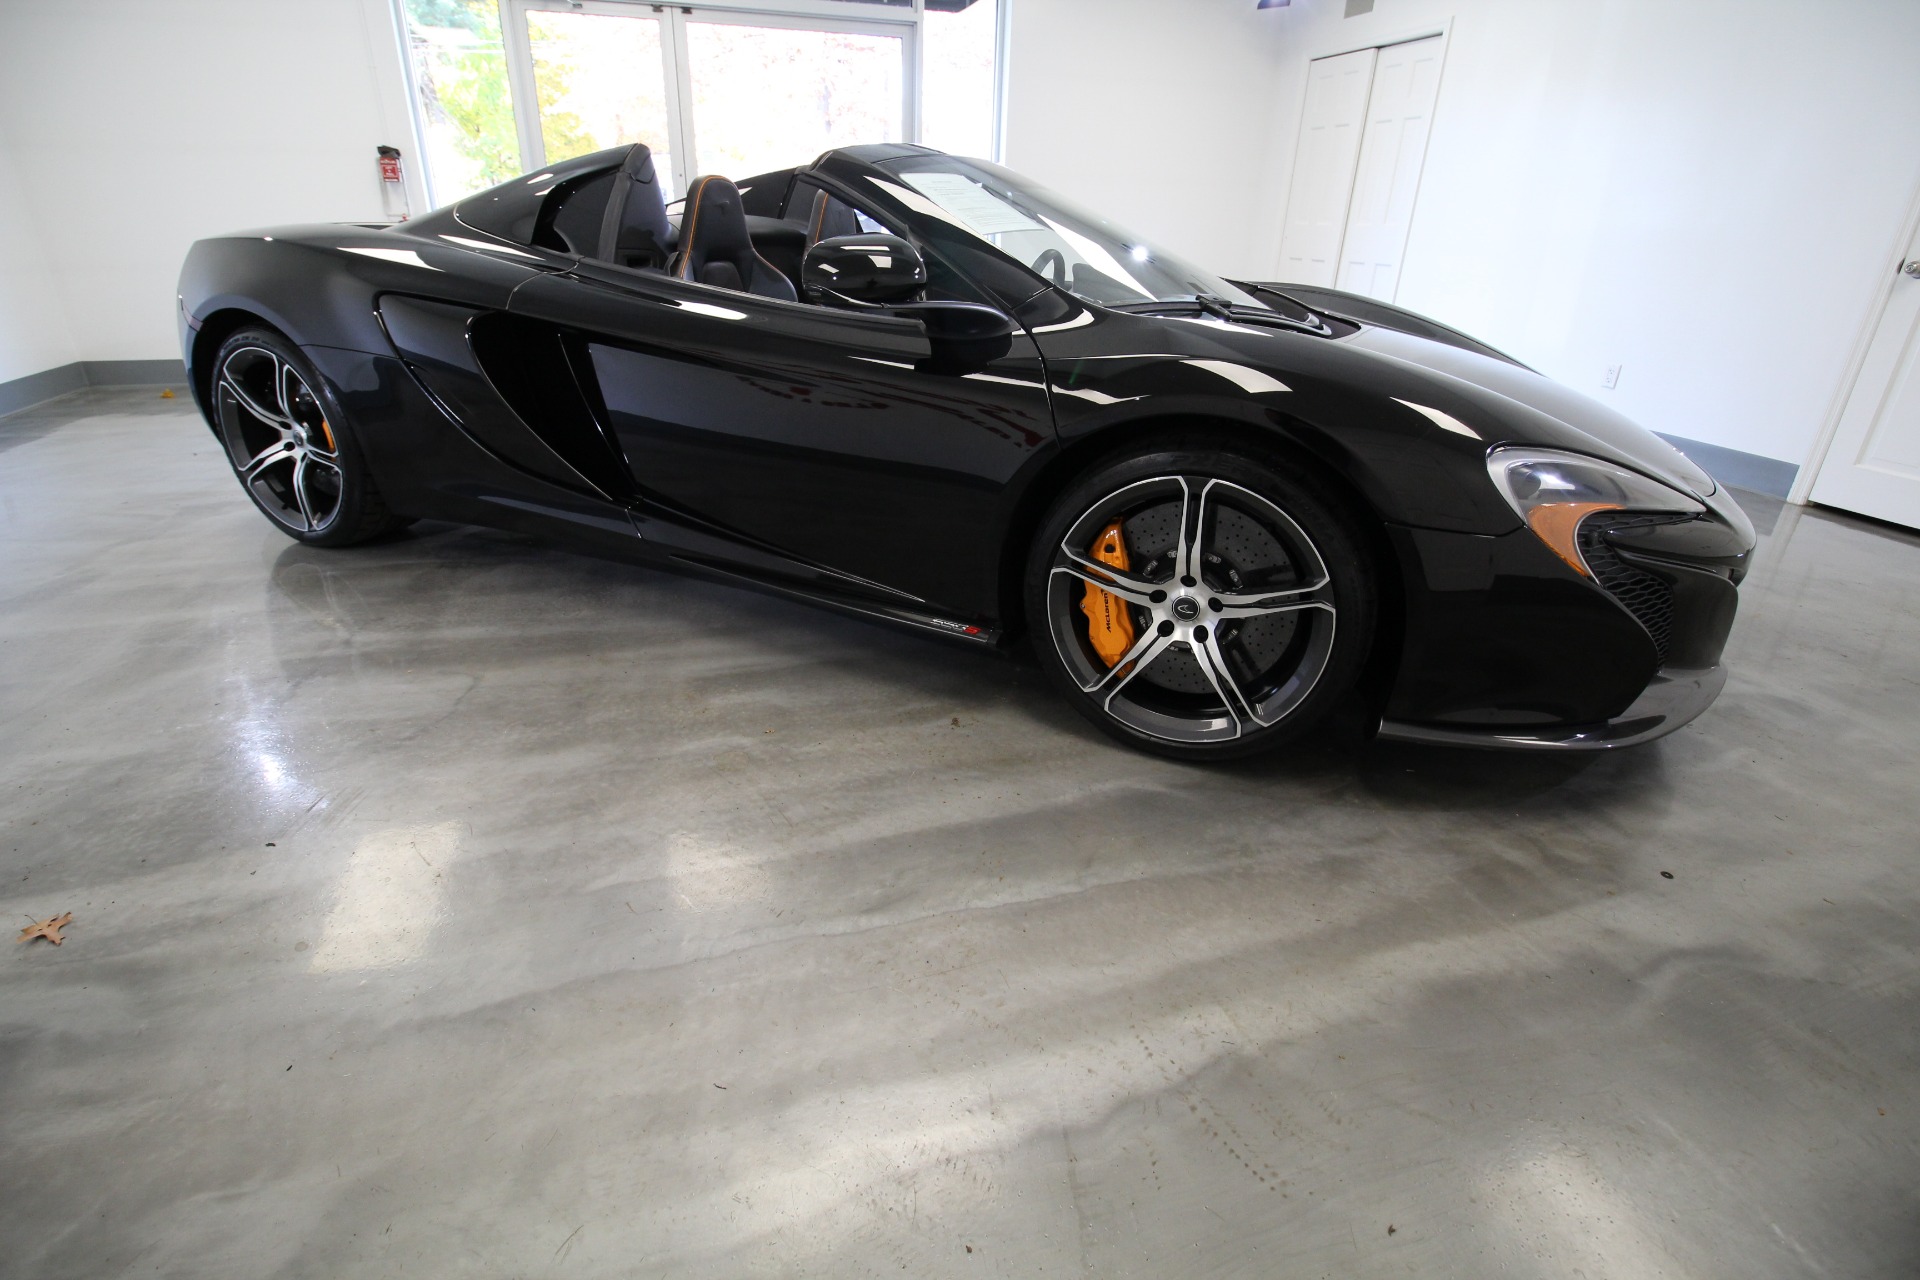 Used 2015 Carbon Black McLaren 650s Spider Local Car 2 Owners Low Miles | Albany, NY